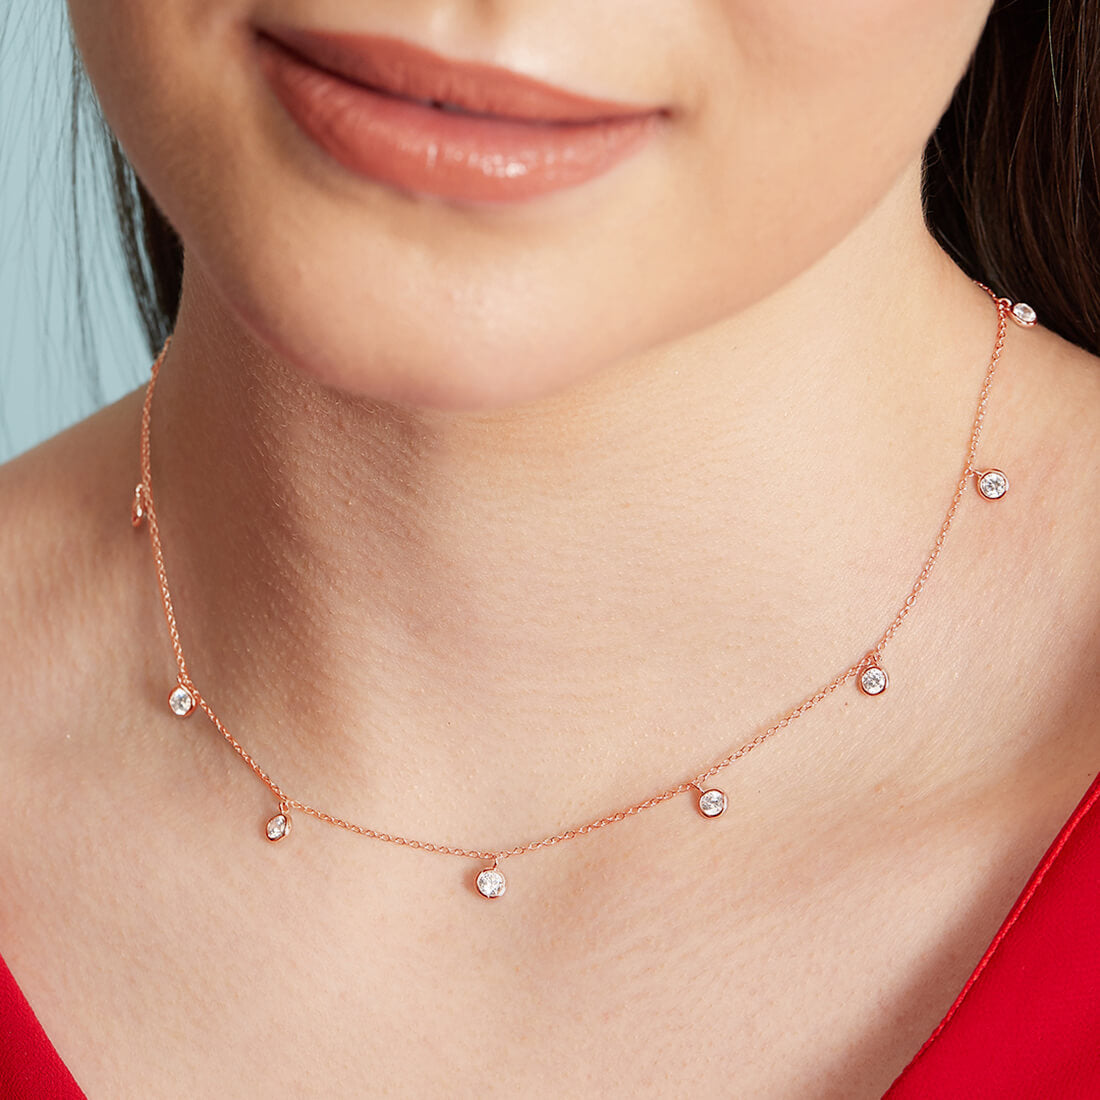 Pretty Charms 925 Silver Necklace in Rose Gold